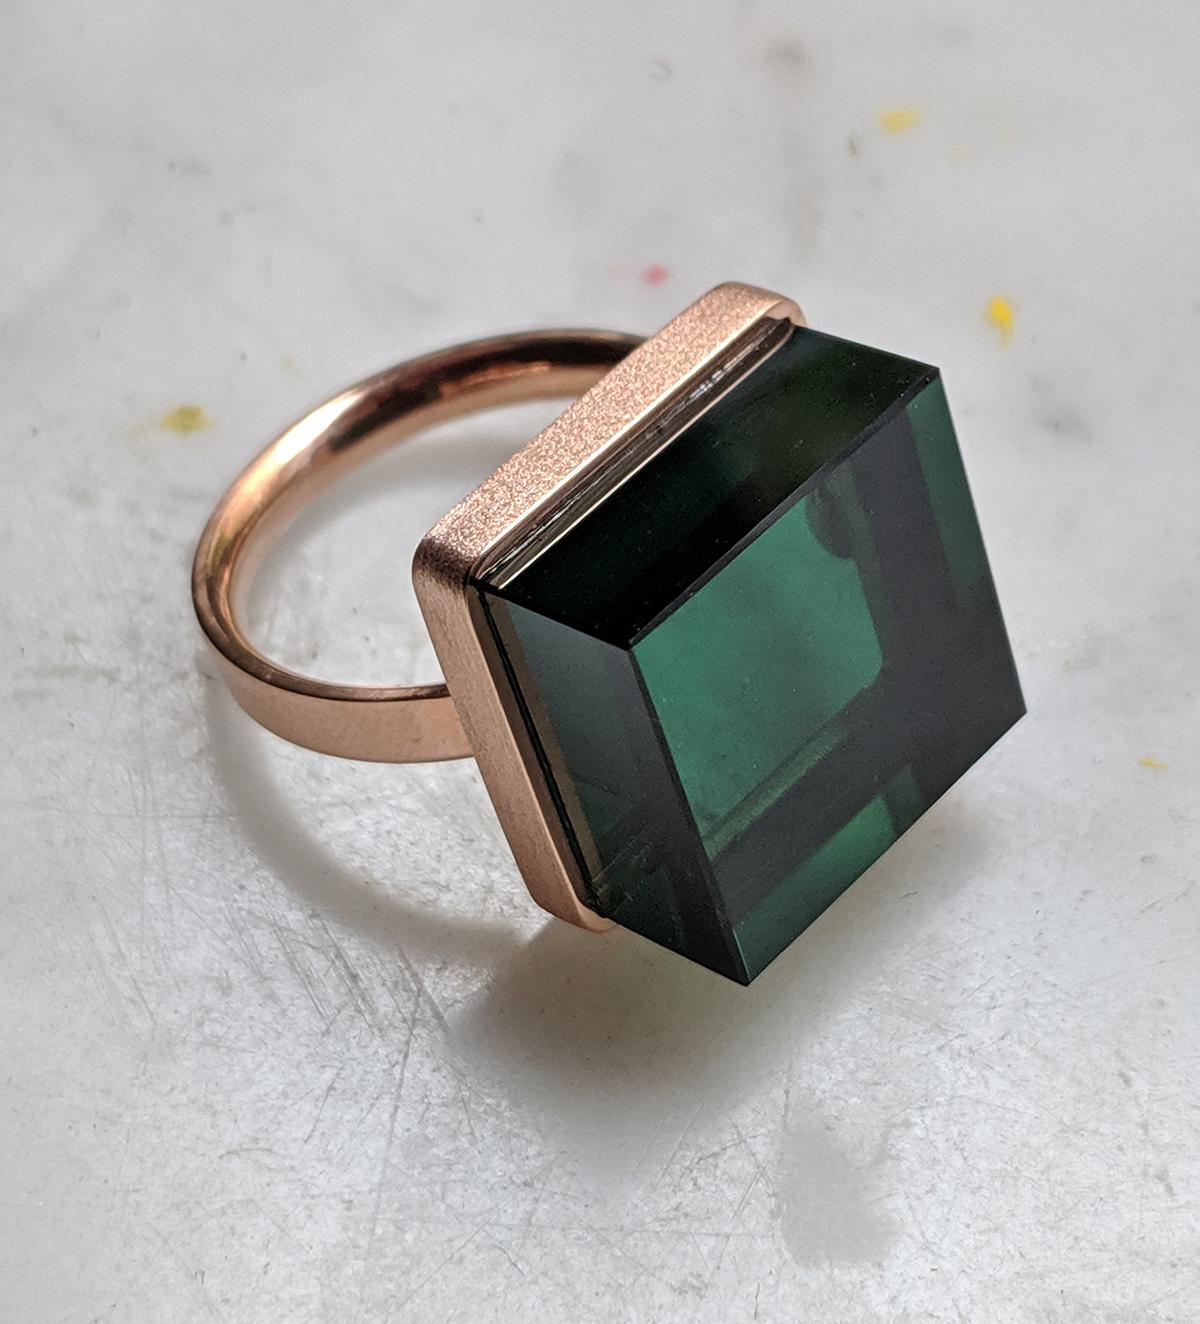 Rose Gold Art Deco Style Ring with Green Quartz Featured in Vogue For Sale 2